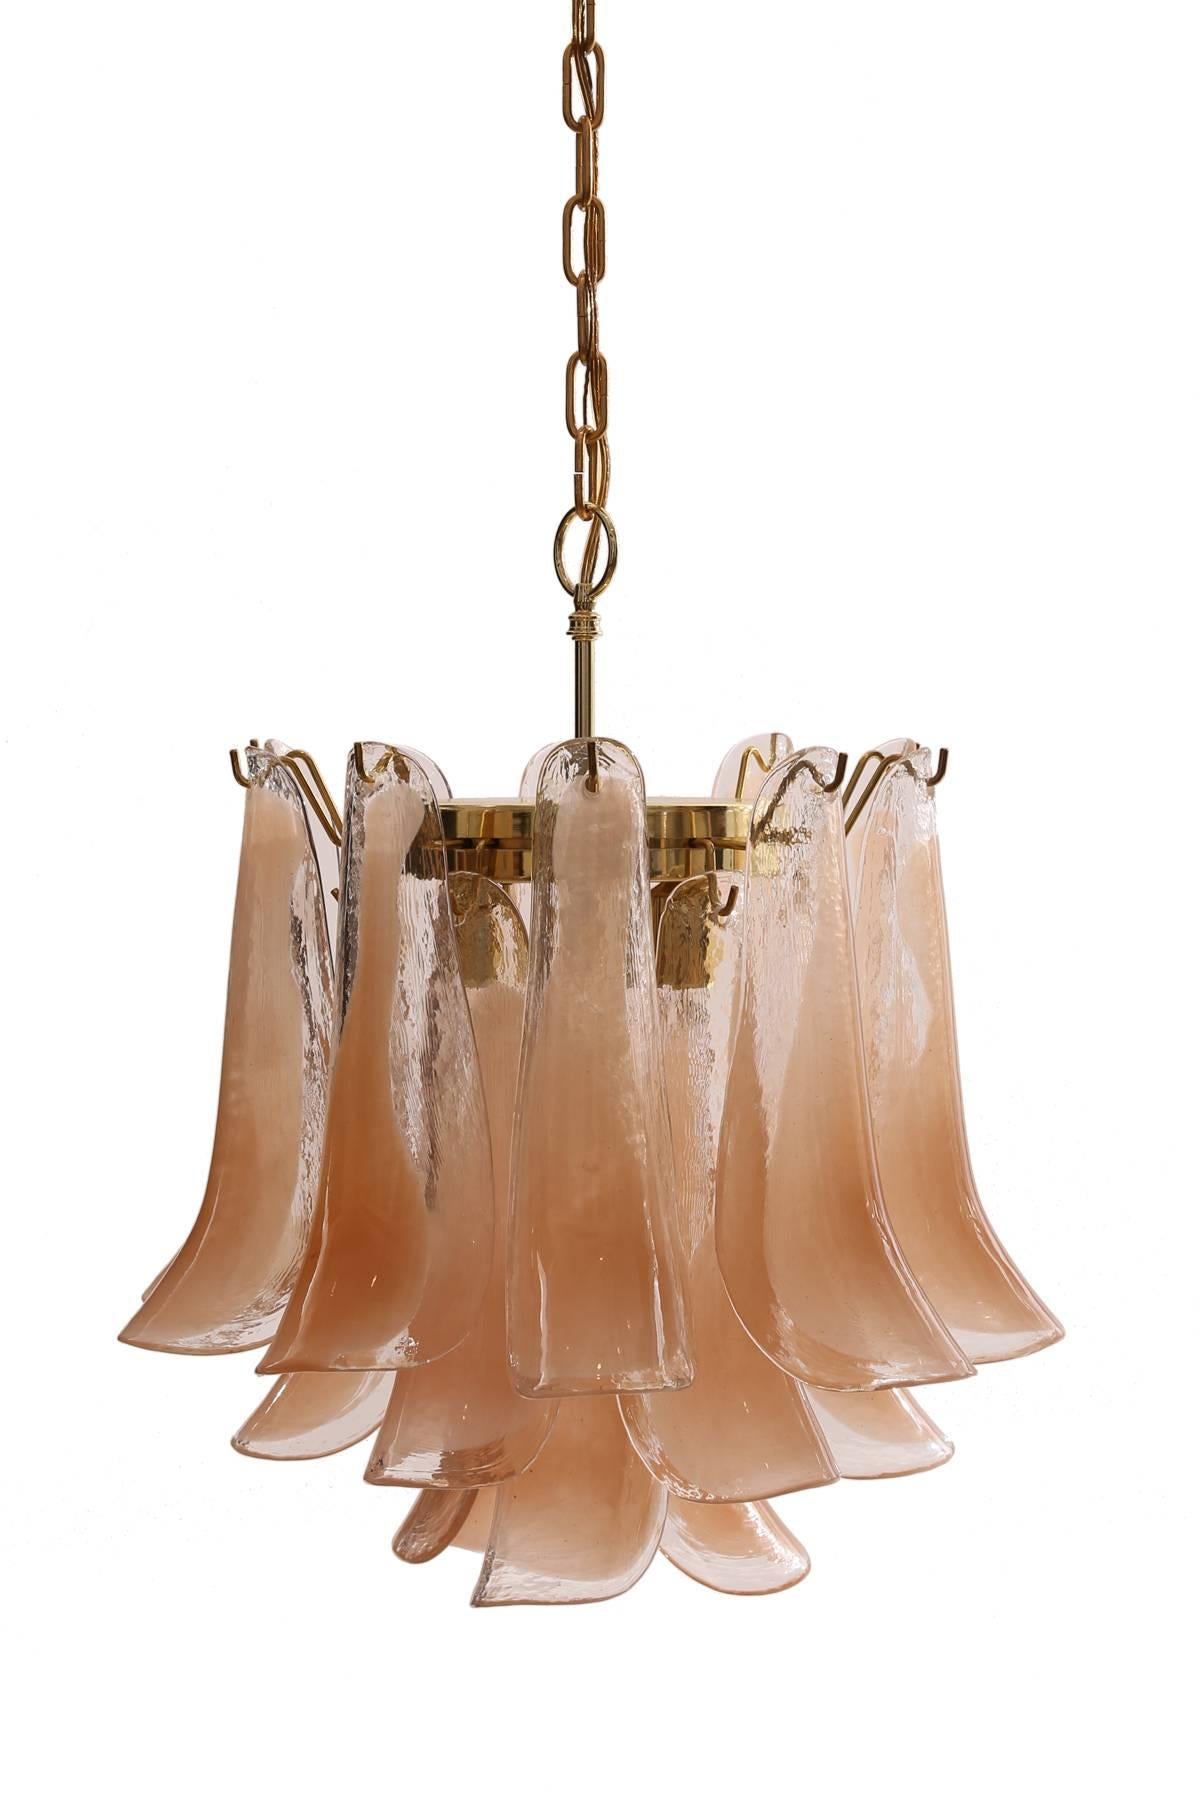 Murano glass chandelier by Mazzega, circa mid-1970s. This three-tiered example has semi opaque and flesh tone Murano glass petals.